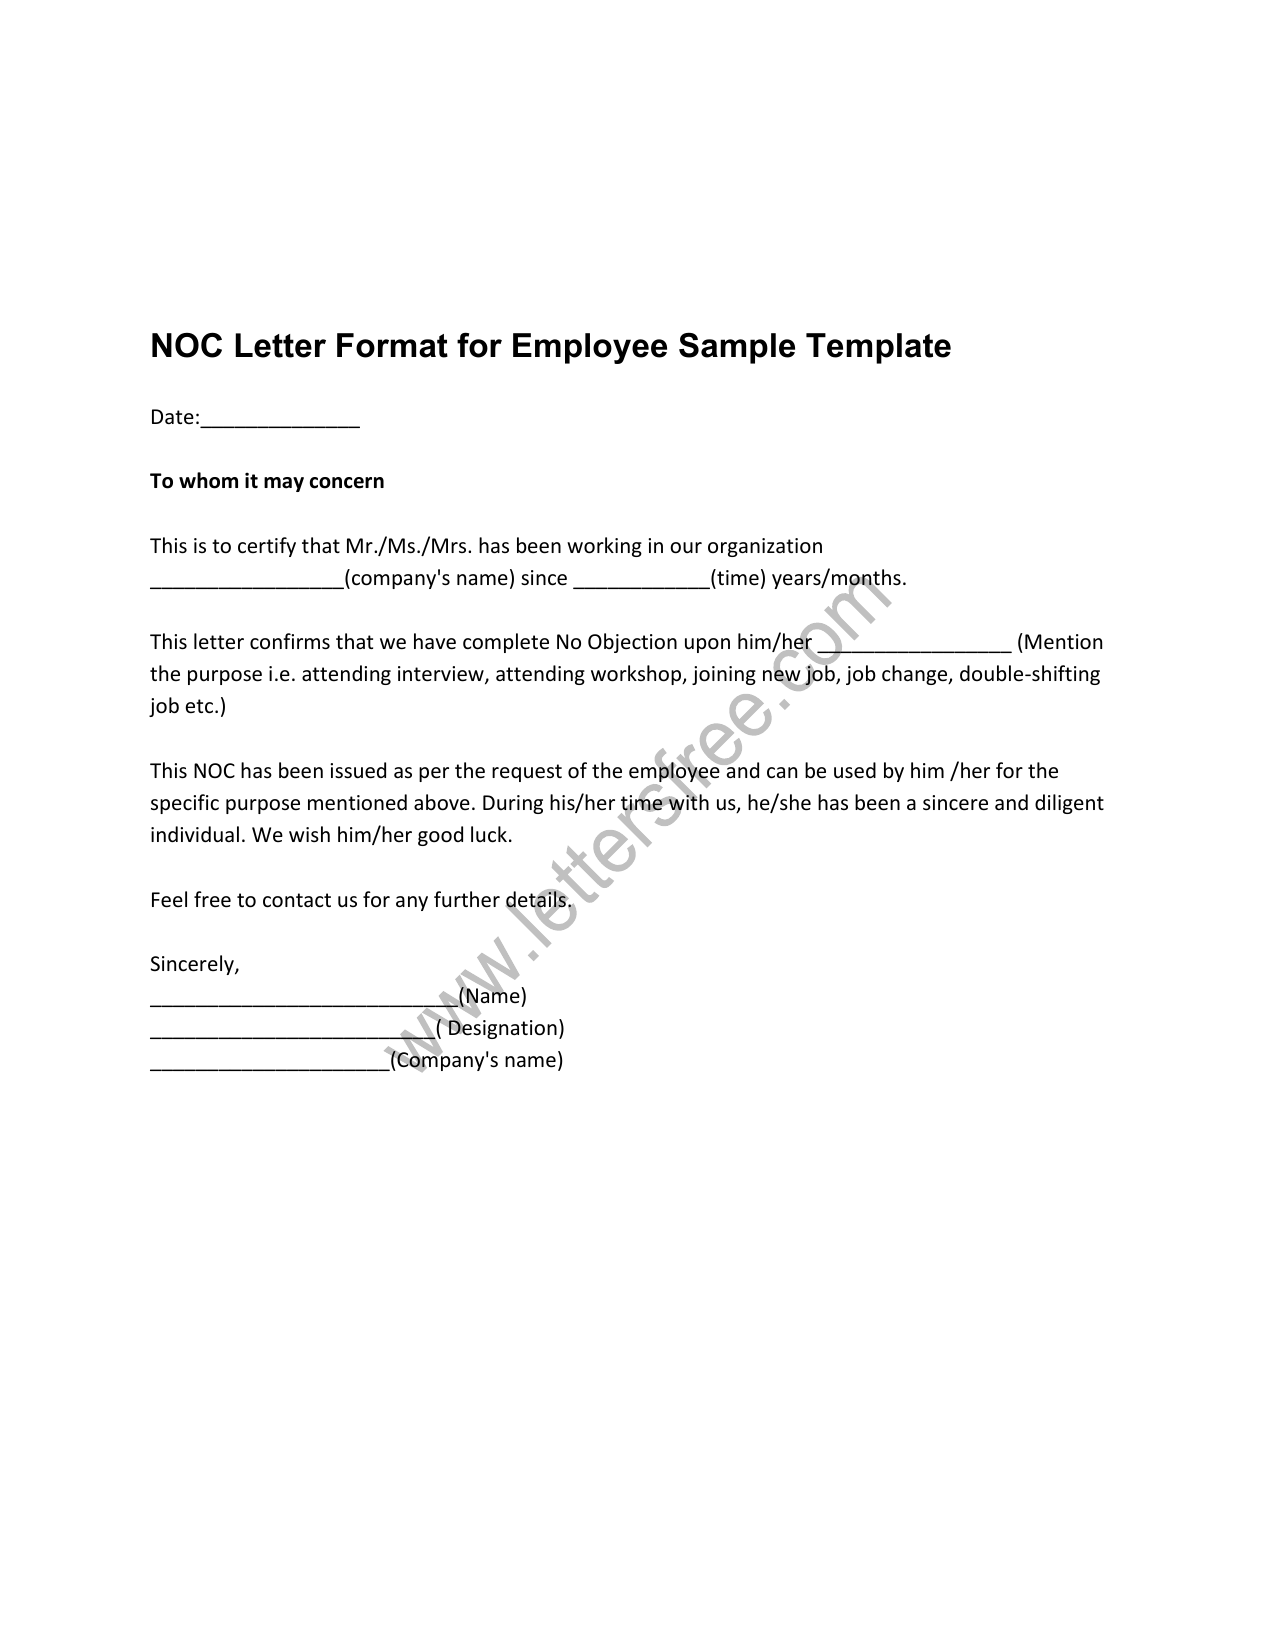 No Objection Certificate Letter Format for Employee Sample Throughout Noc Report Template